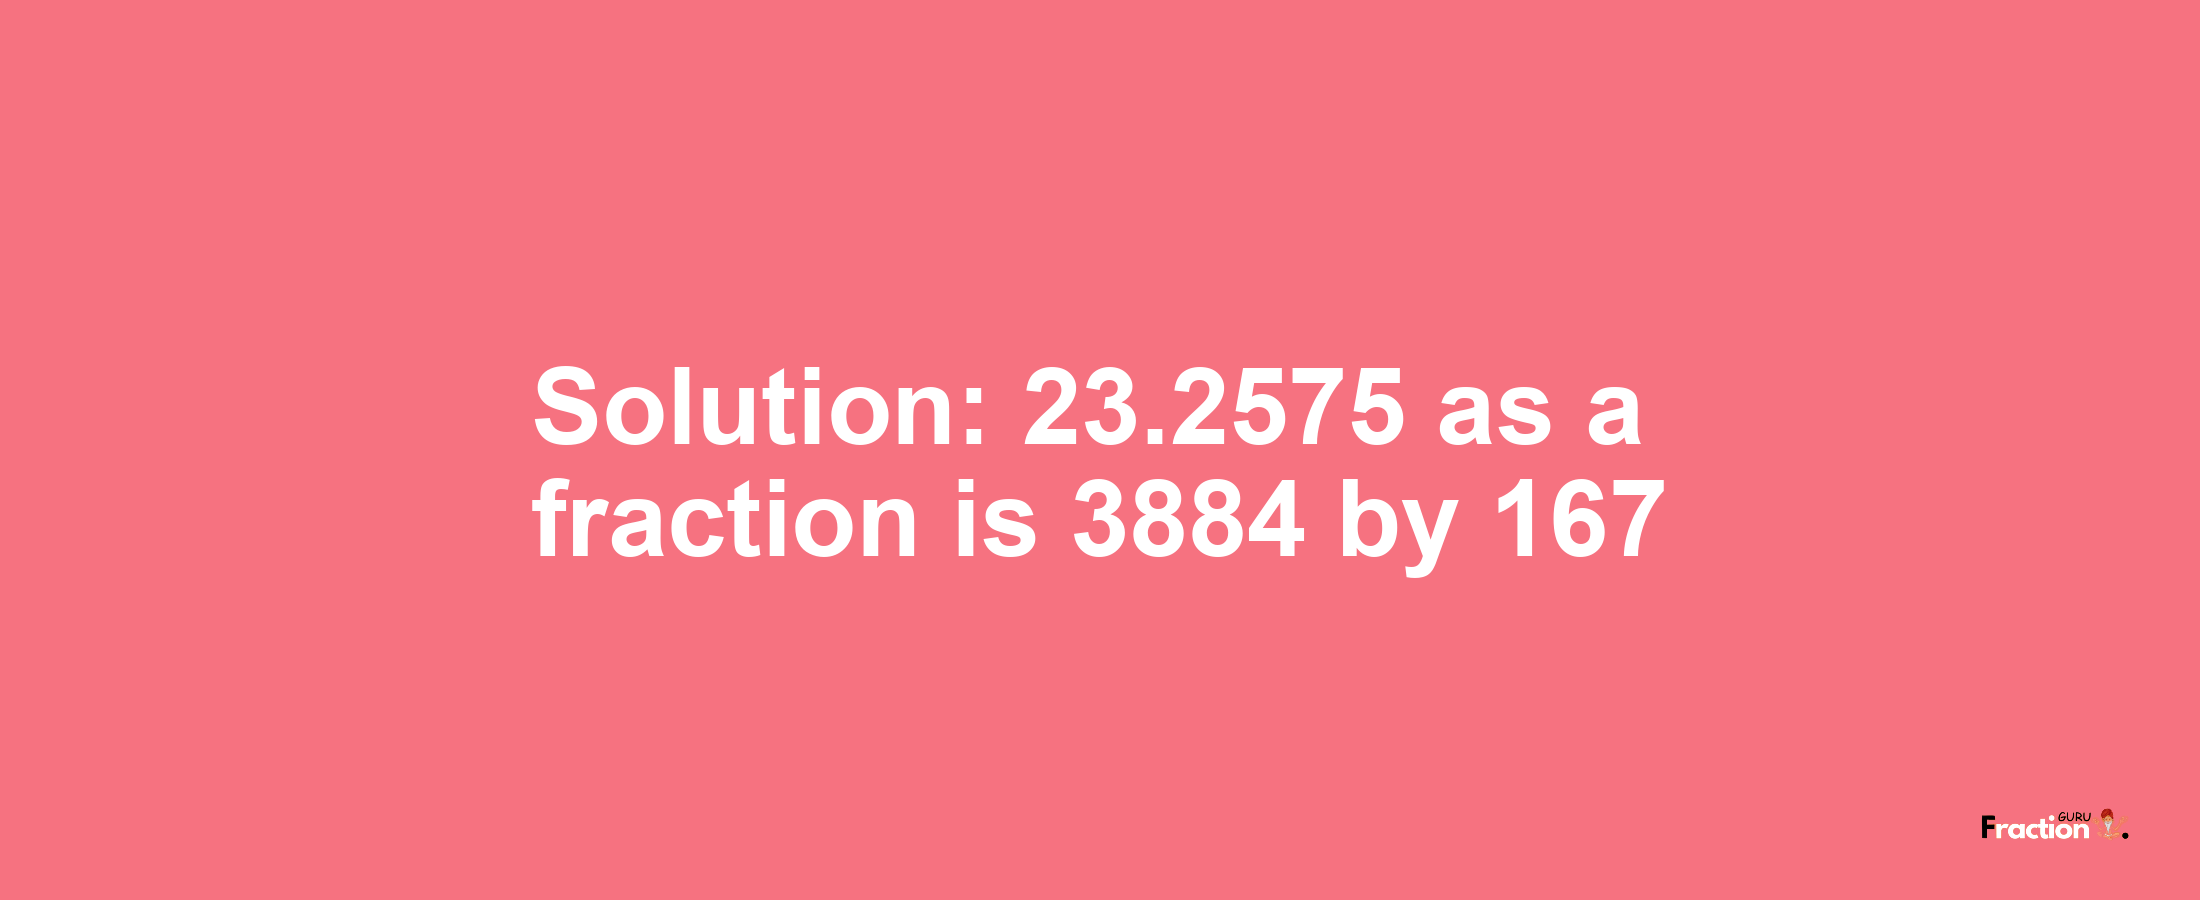 Solution:23.2575 as a fraction is 3884/167